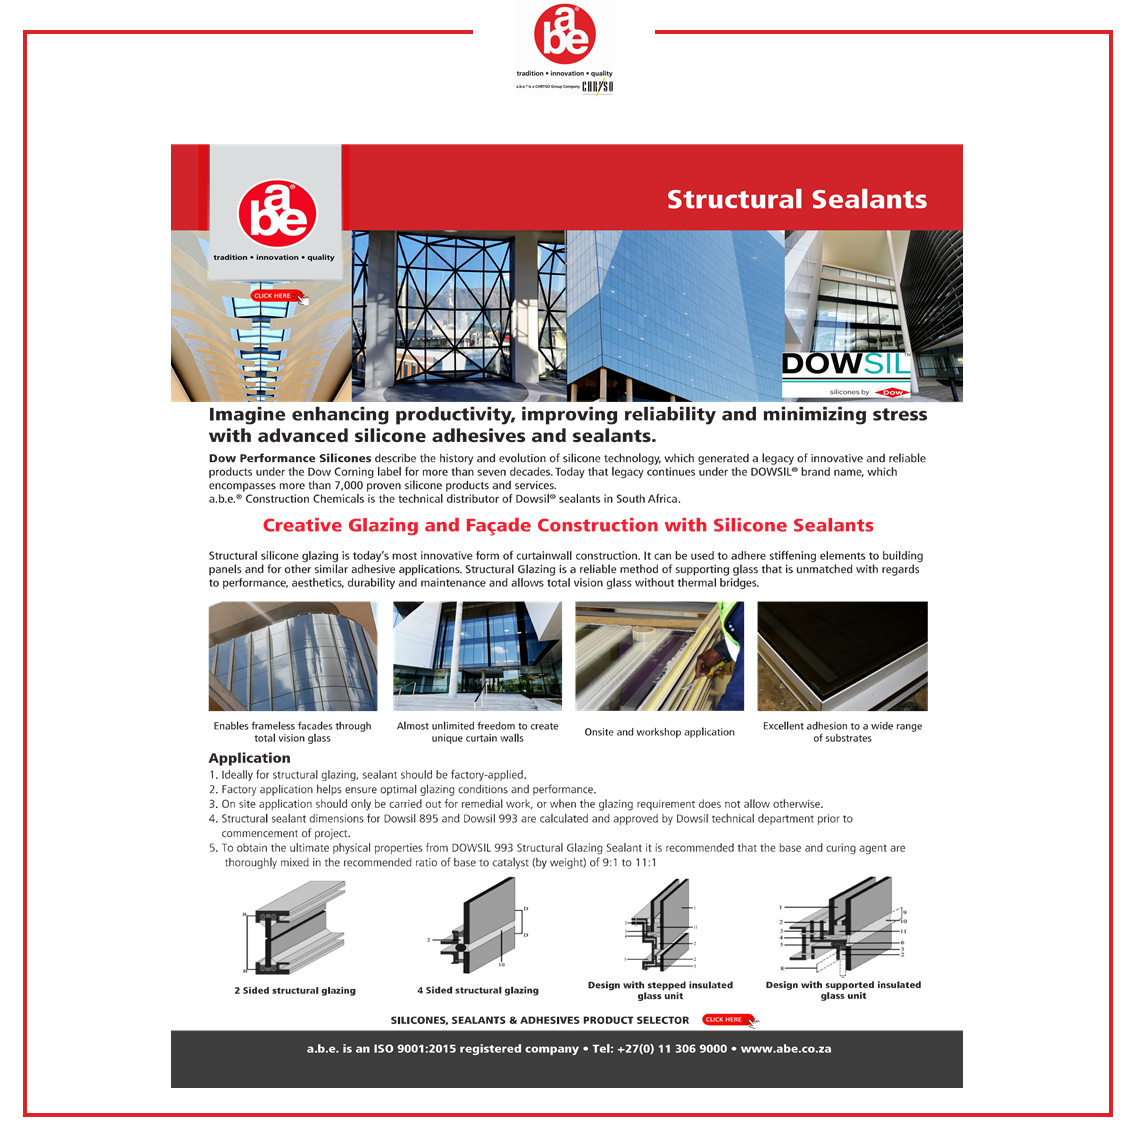 ABE - Structural-sealants-flyer Catalogue